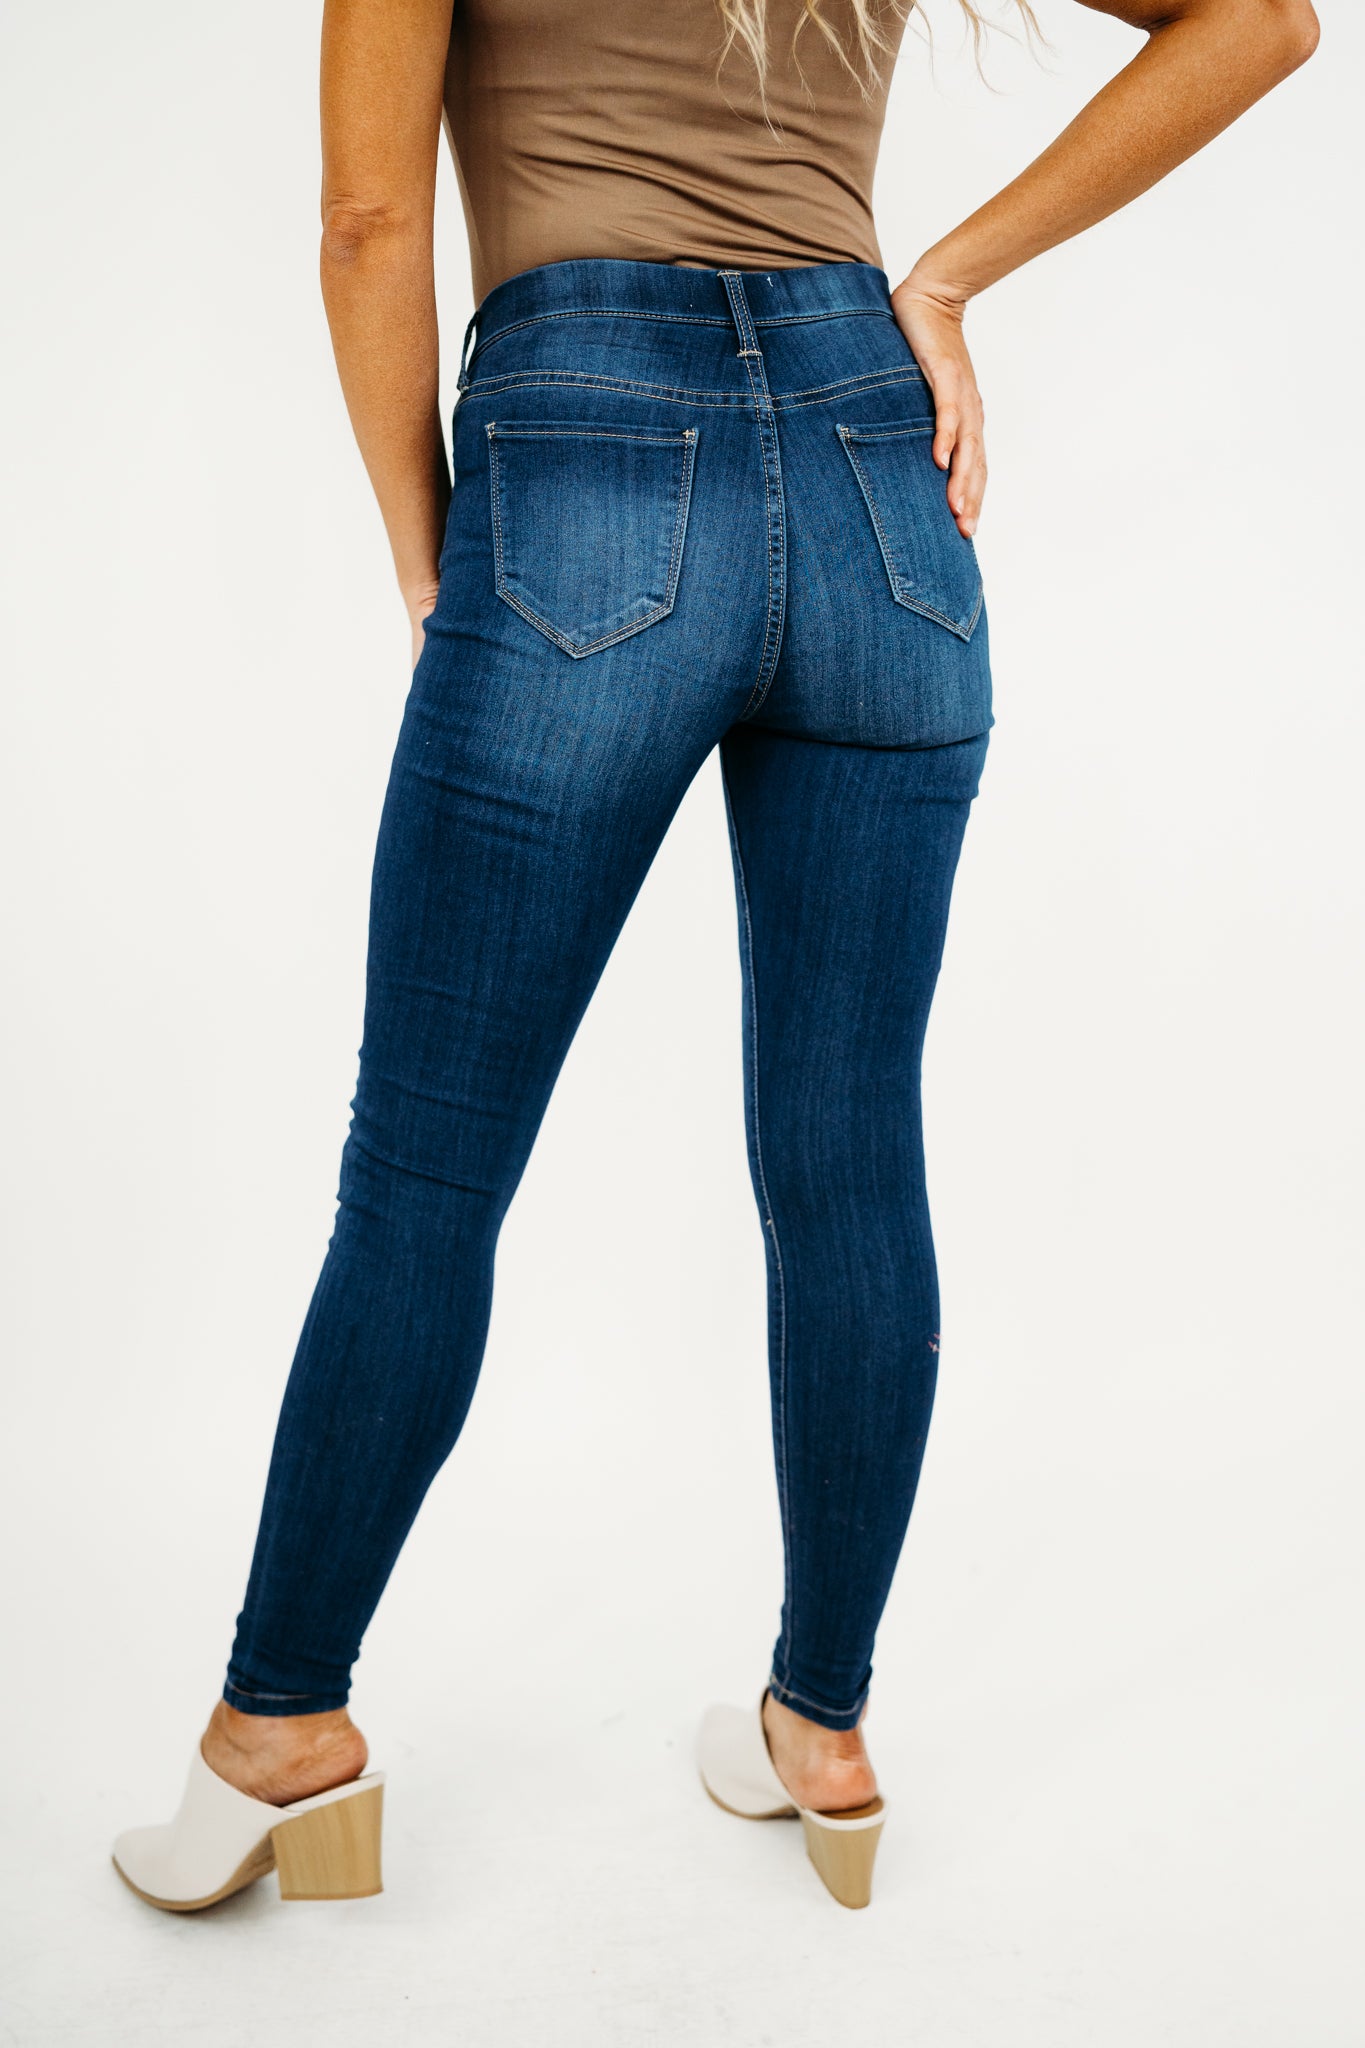 The Sydney Pull On Skinny Jelly Jean